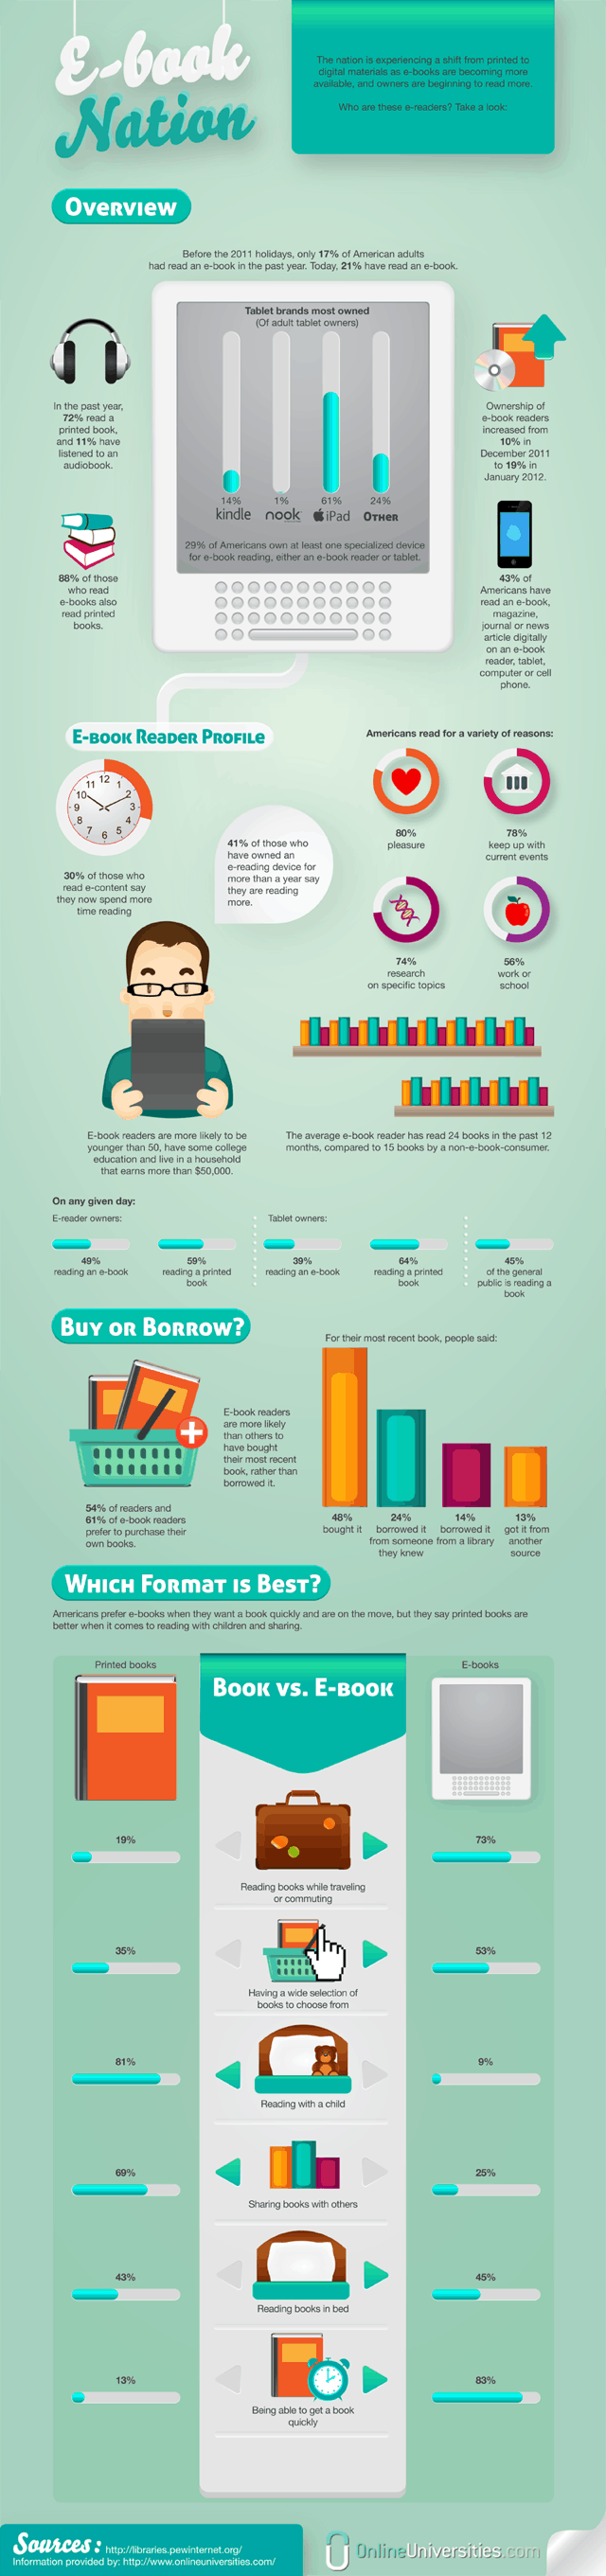 INFOGRAPHIC: Book Buying and Reading in the U.S. | Technology for Publishing LLC